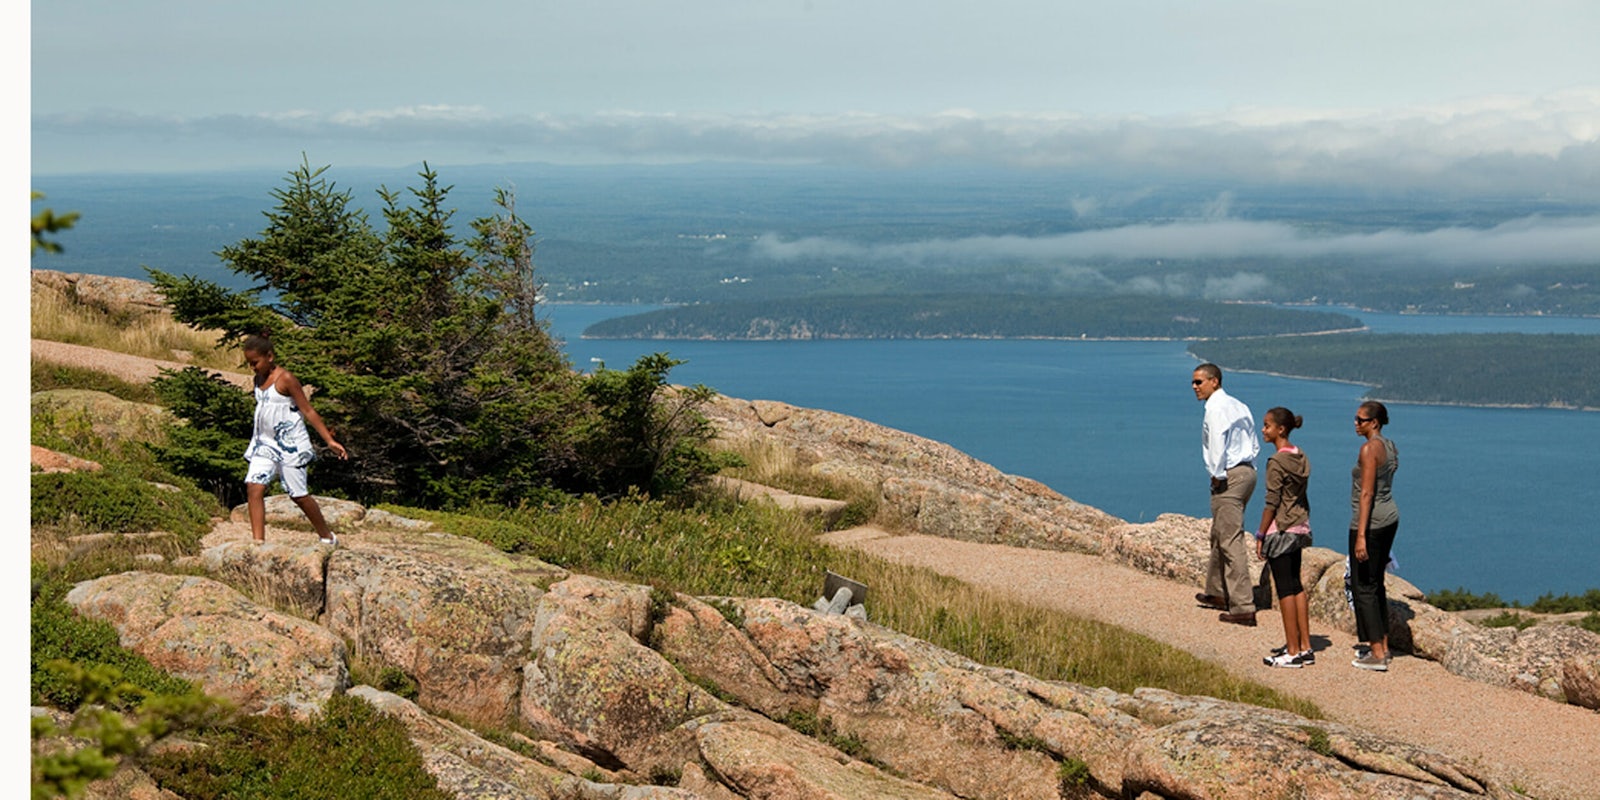 President Barack Obama and his family hike on Cadillac Mountain at Acadia National Park in Maine, July 16, 2010. Photo by Pete Souza.